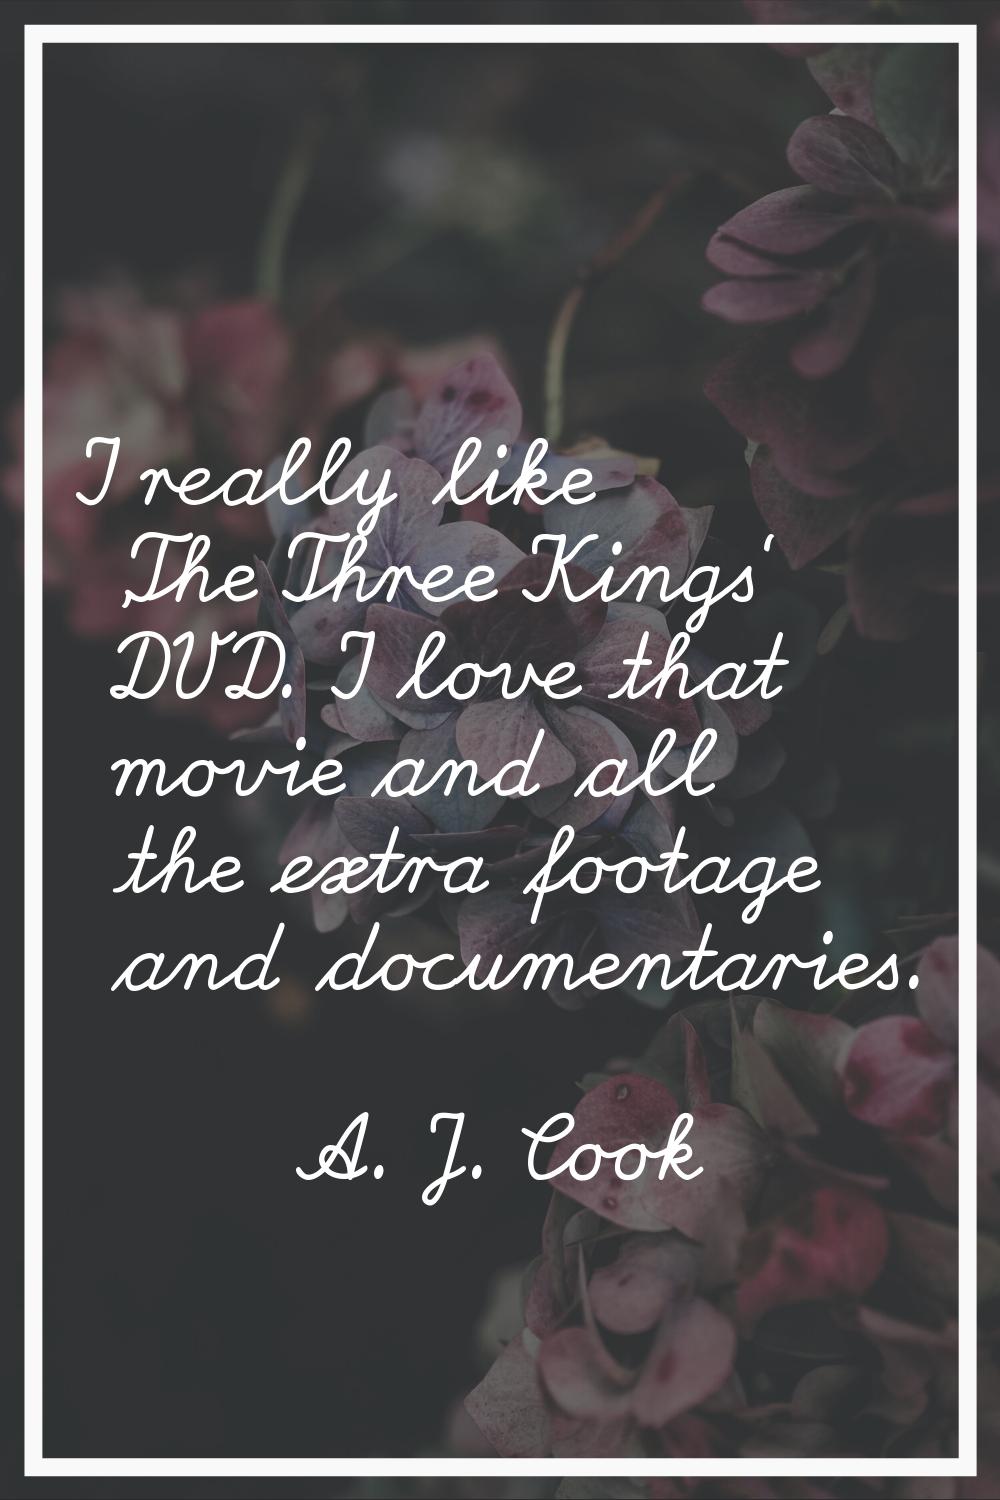 I really like 'The Three Kings' DVD. I love that movie and all the extra footage and documentaries.